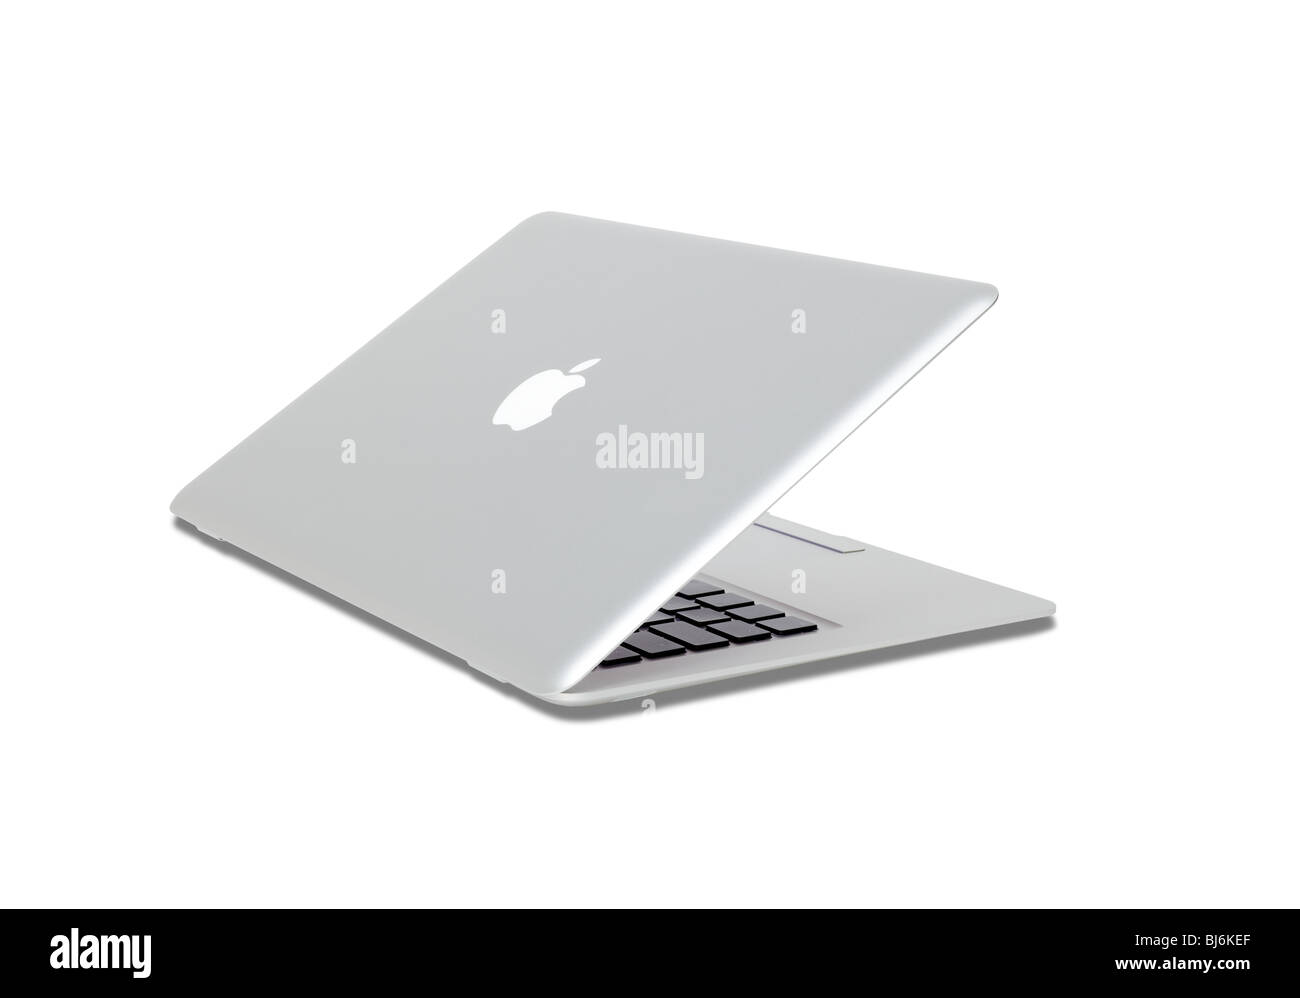 macbook-air-ultra-slim-and-portable-lapt